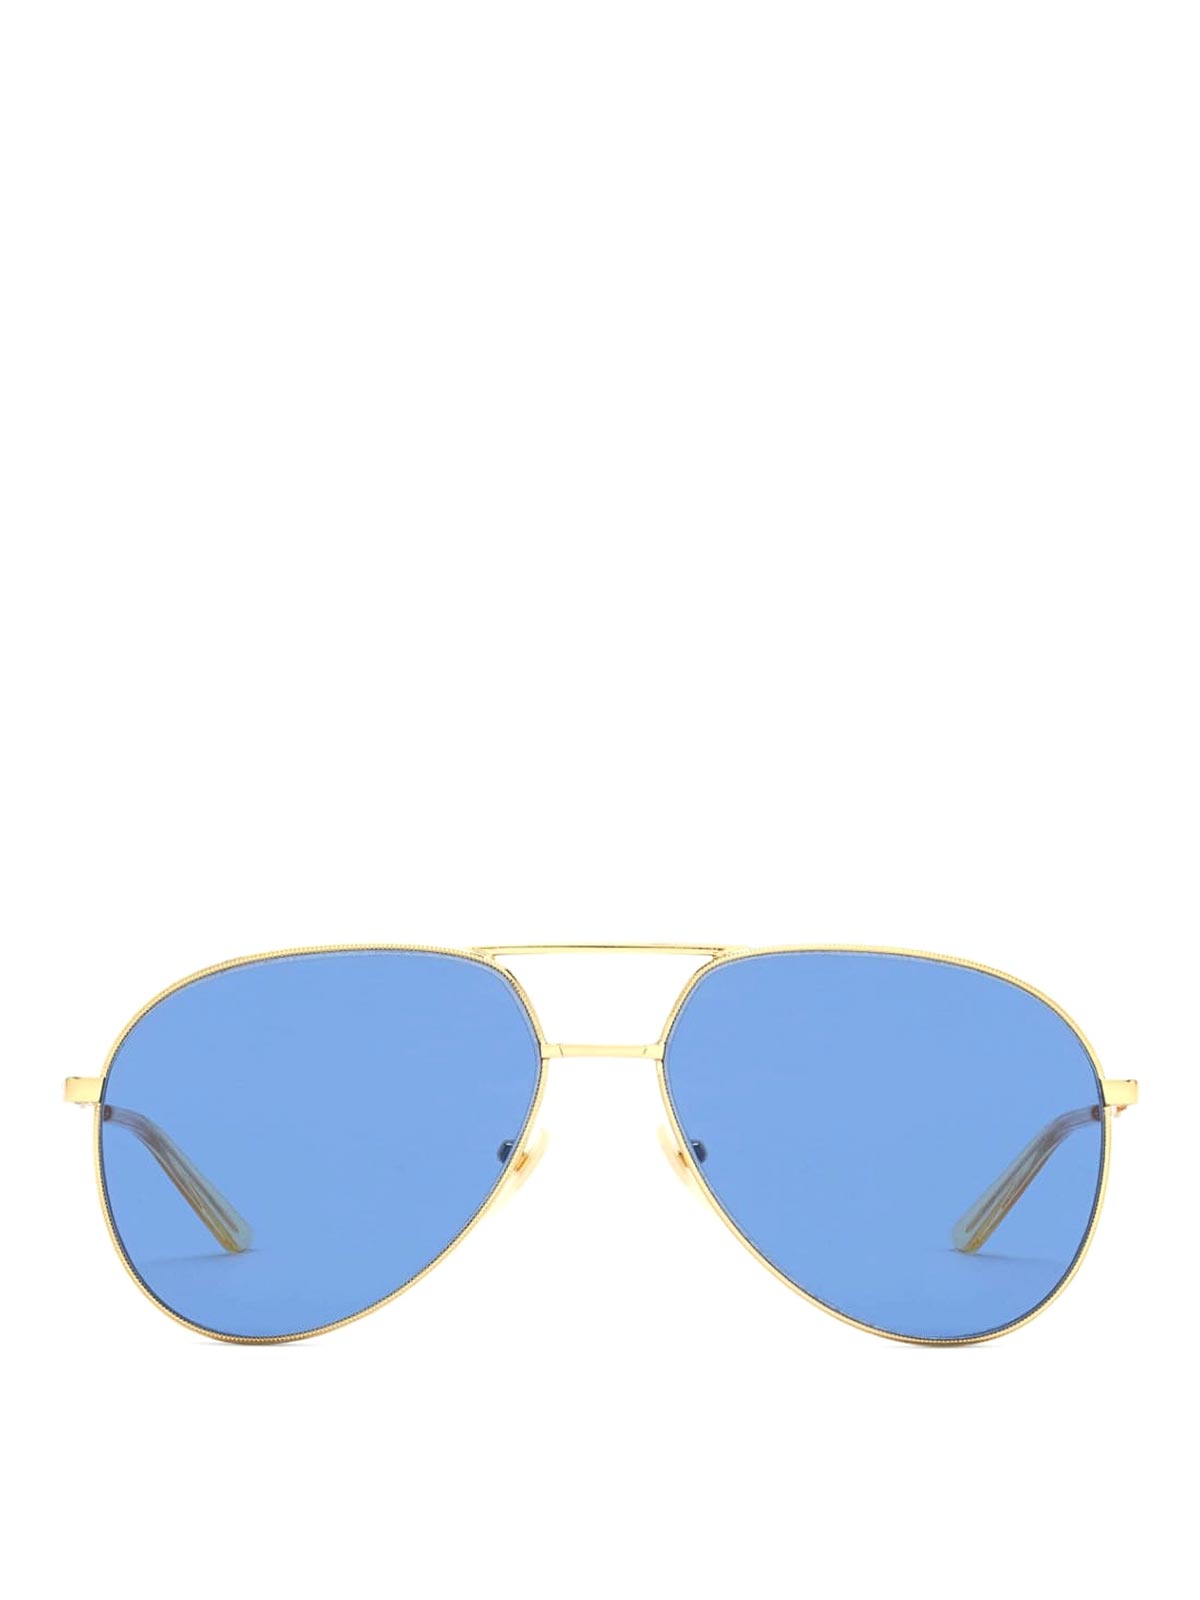 Gucci Eyeglasses In Gold